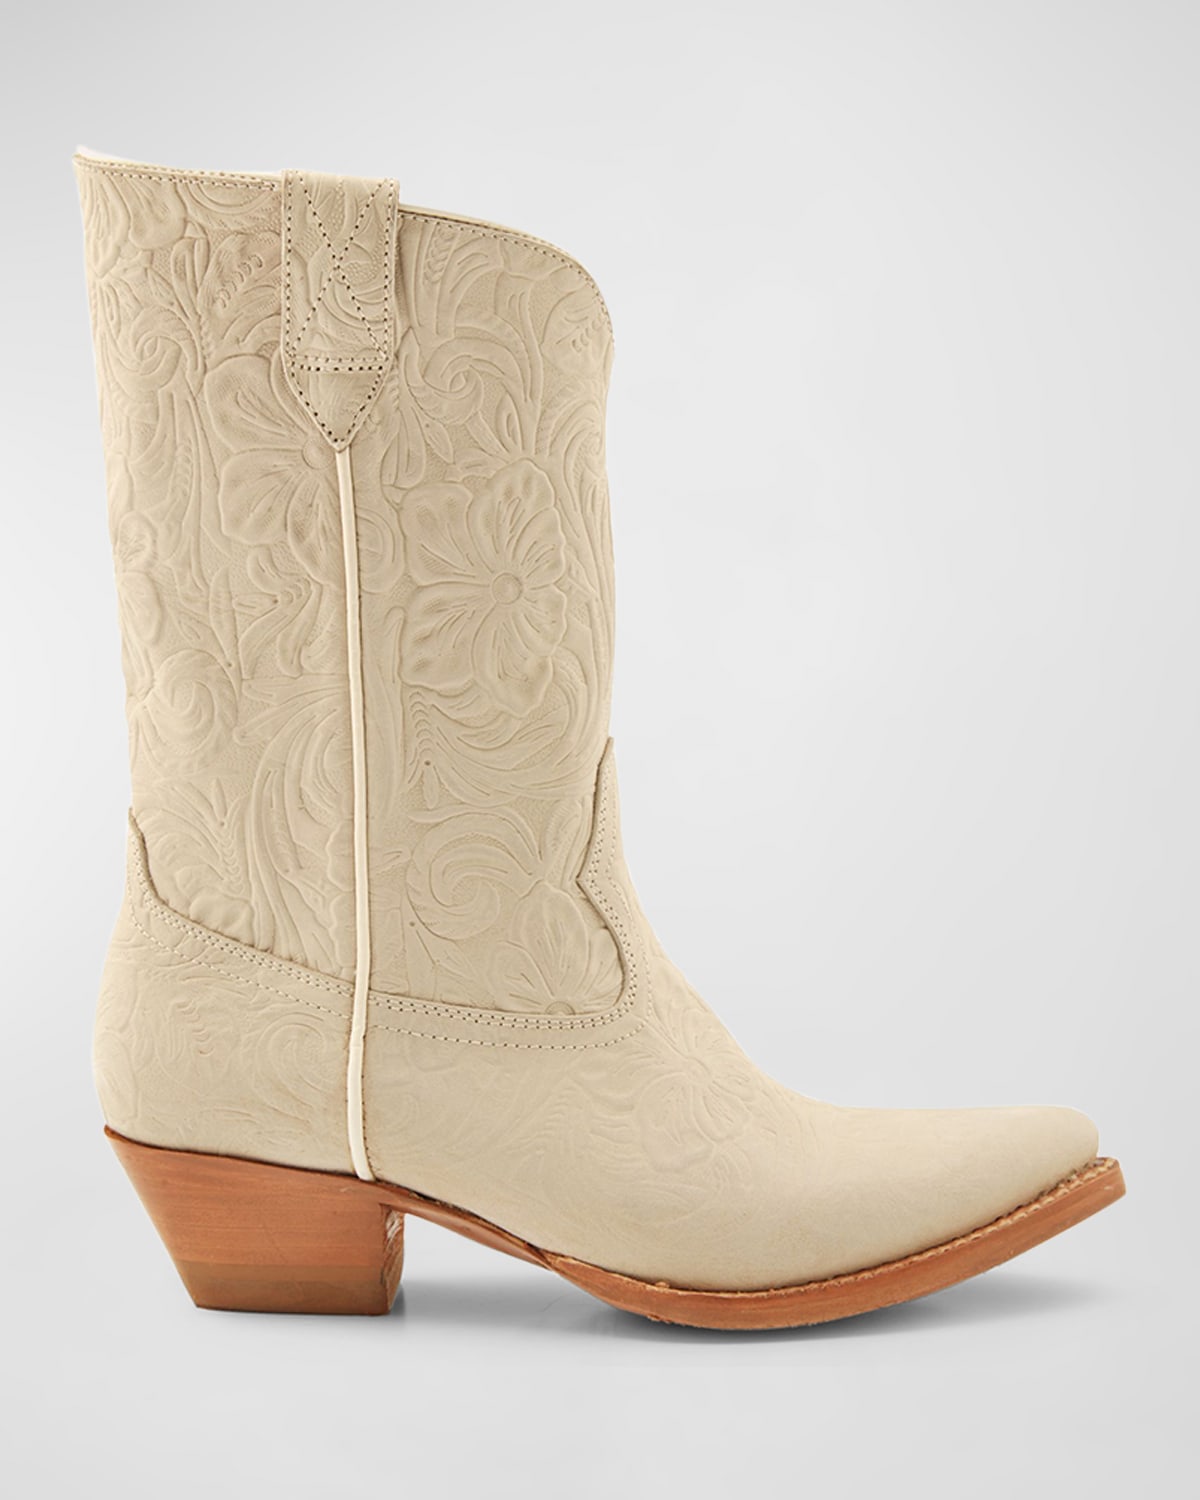 Sacha Floral Mid Western Boots